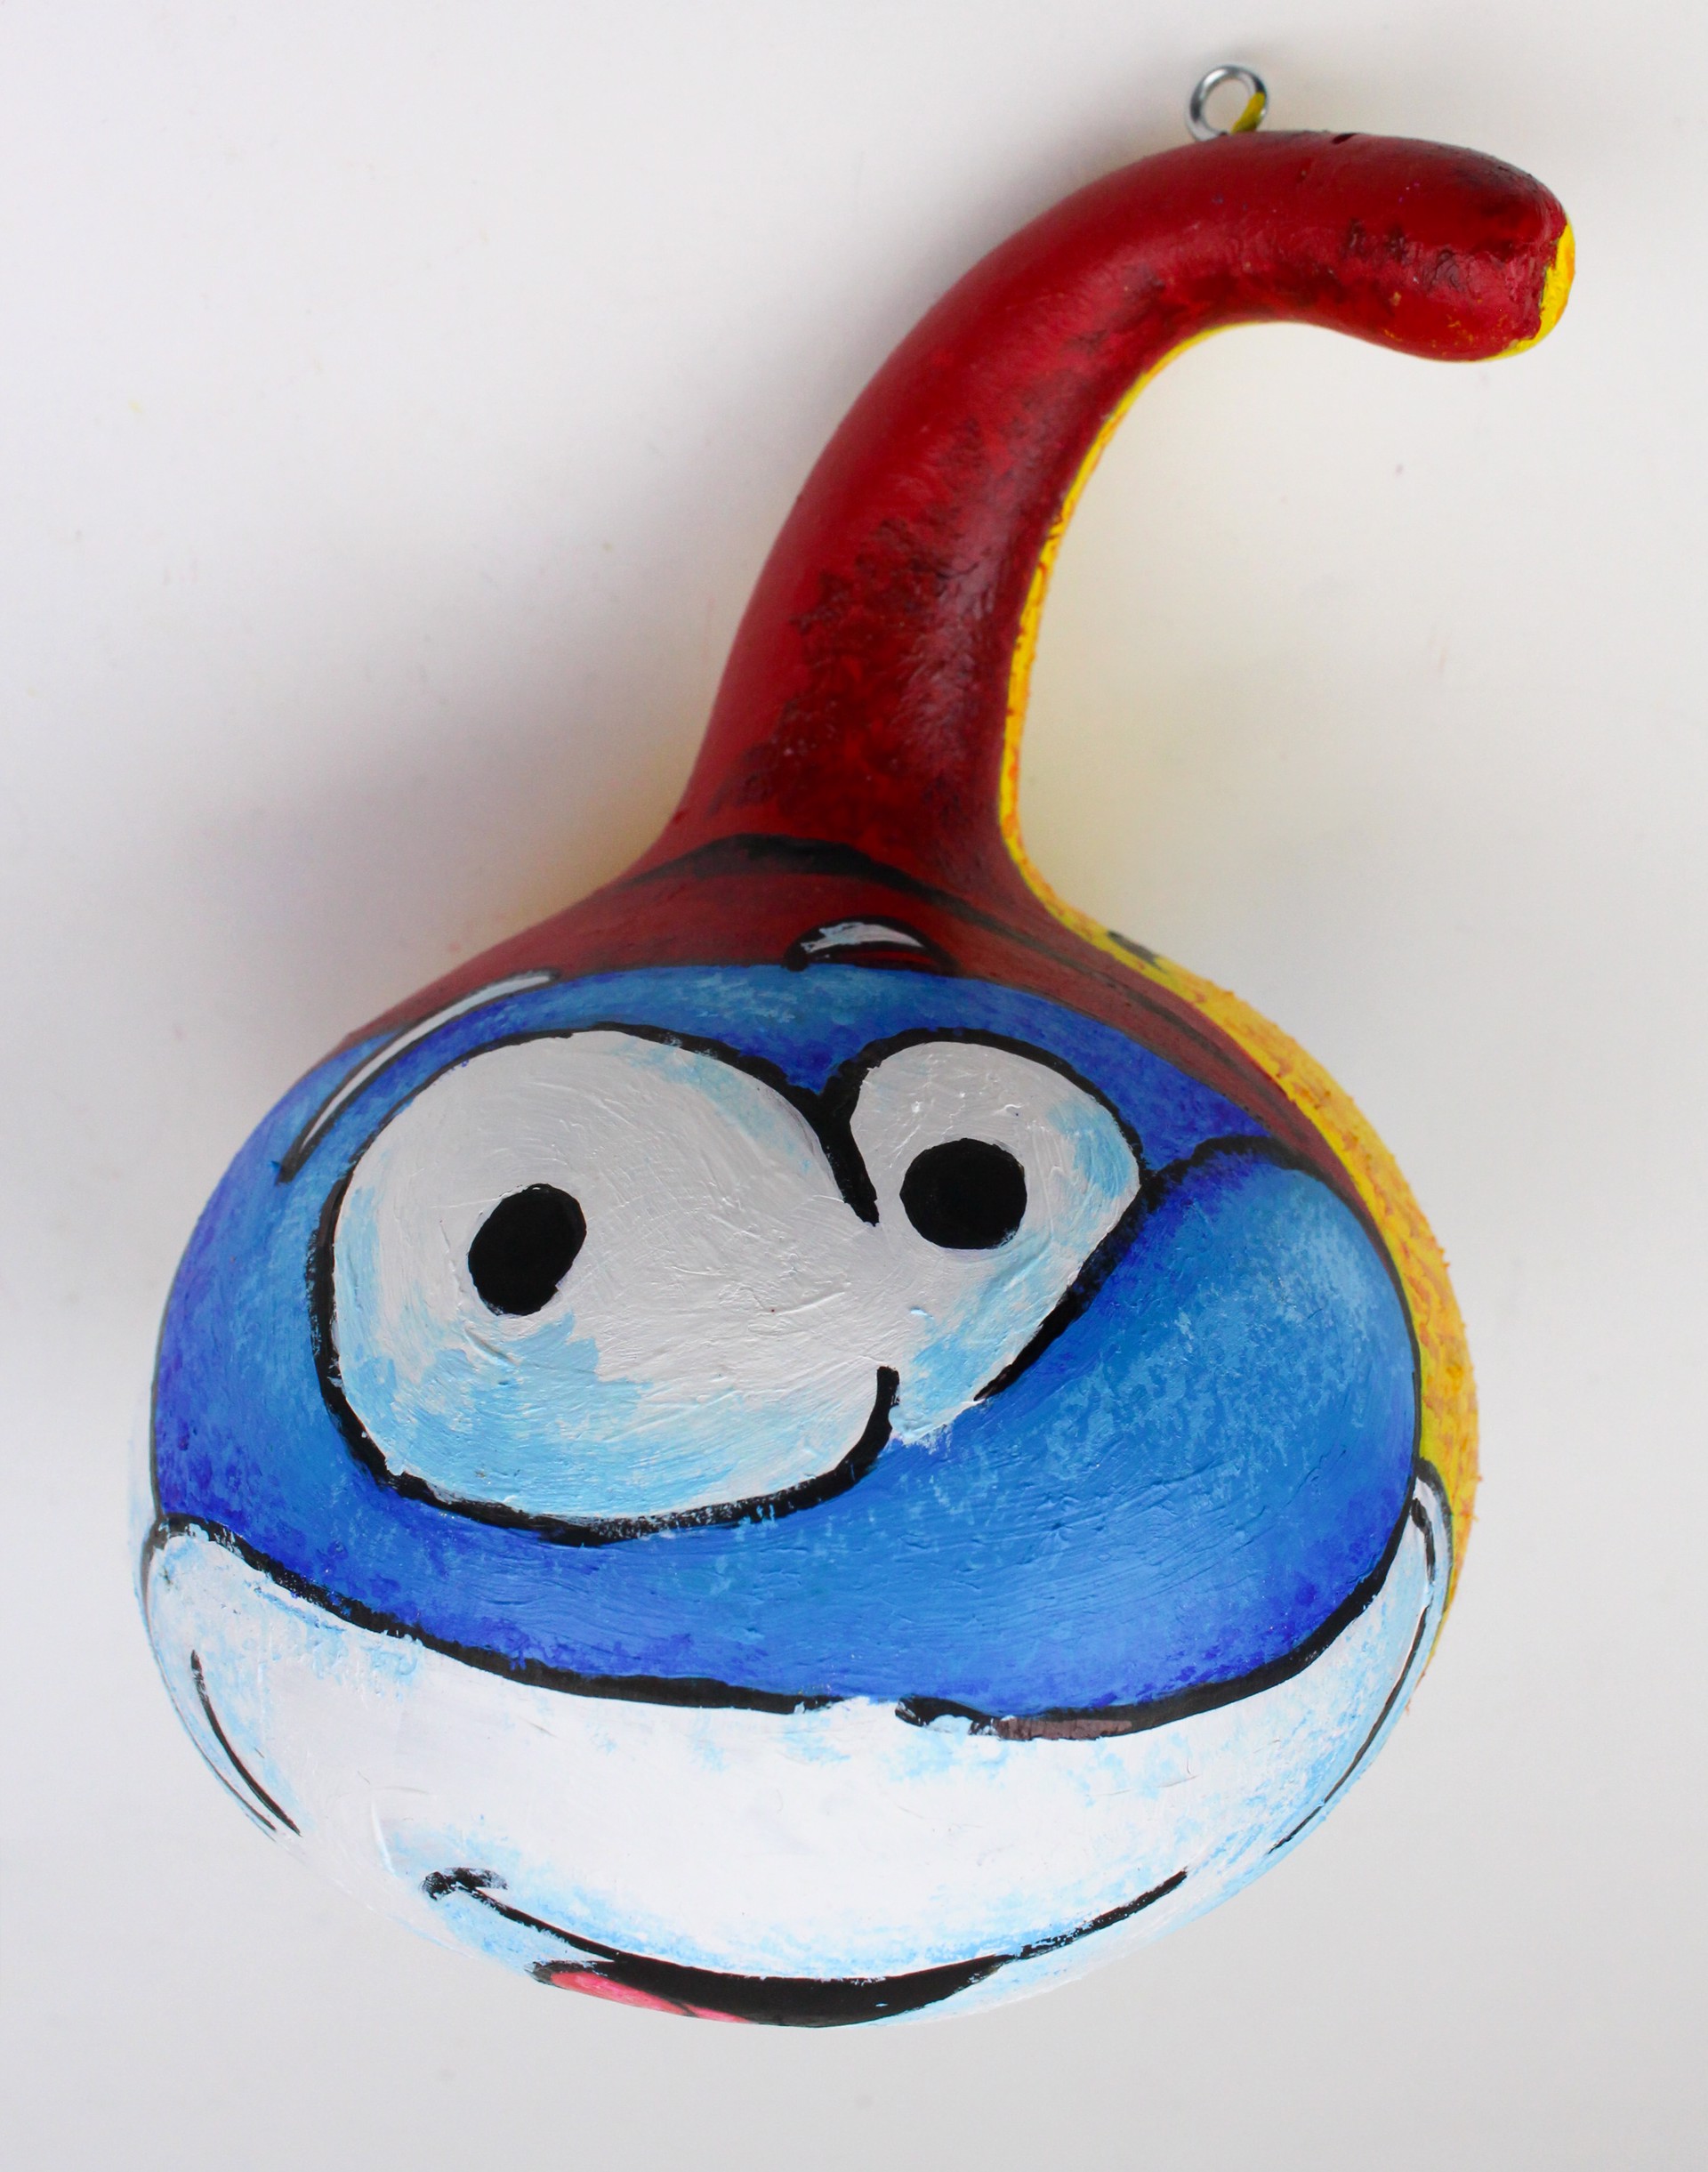 Papa Smurf Gourd (ornament) by Eric Atkinson